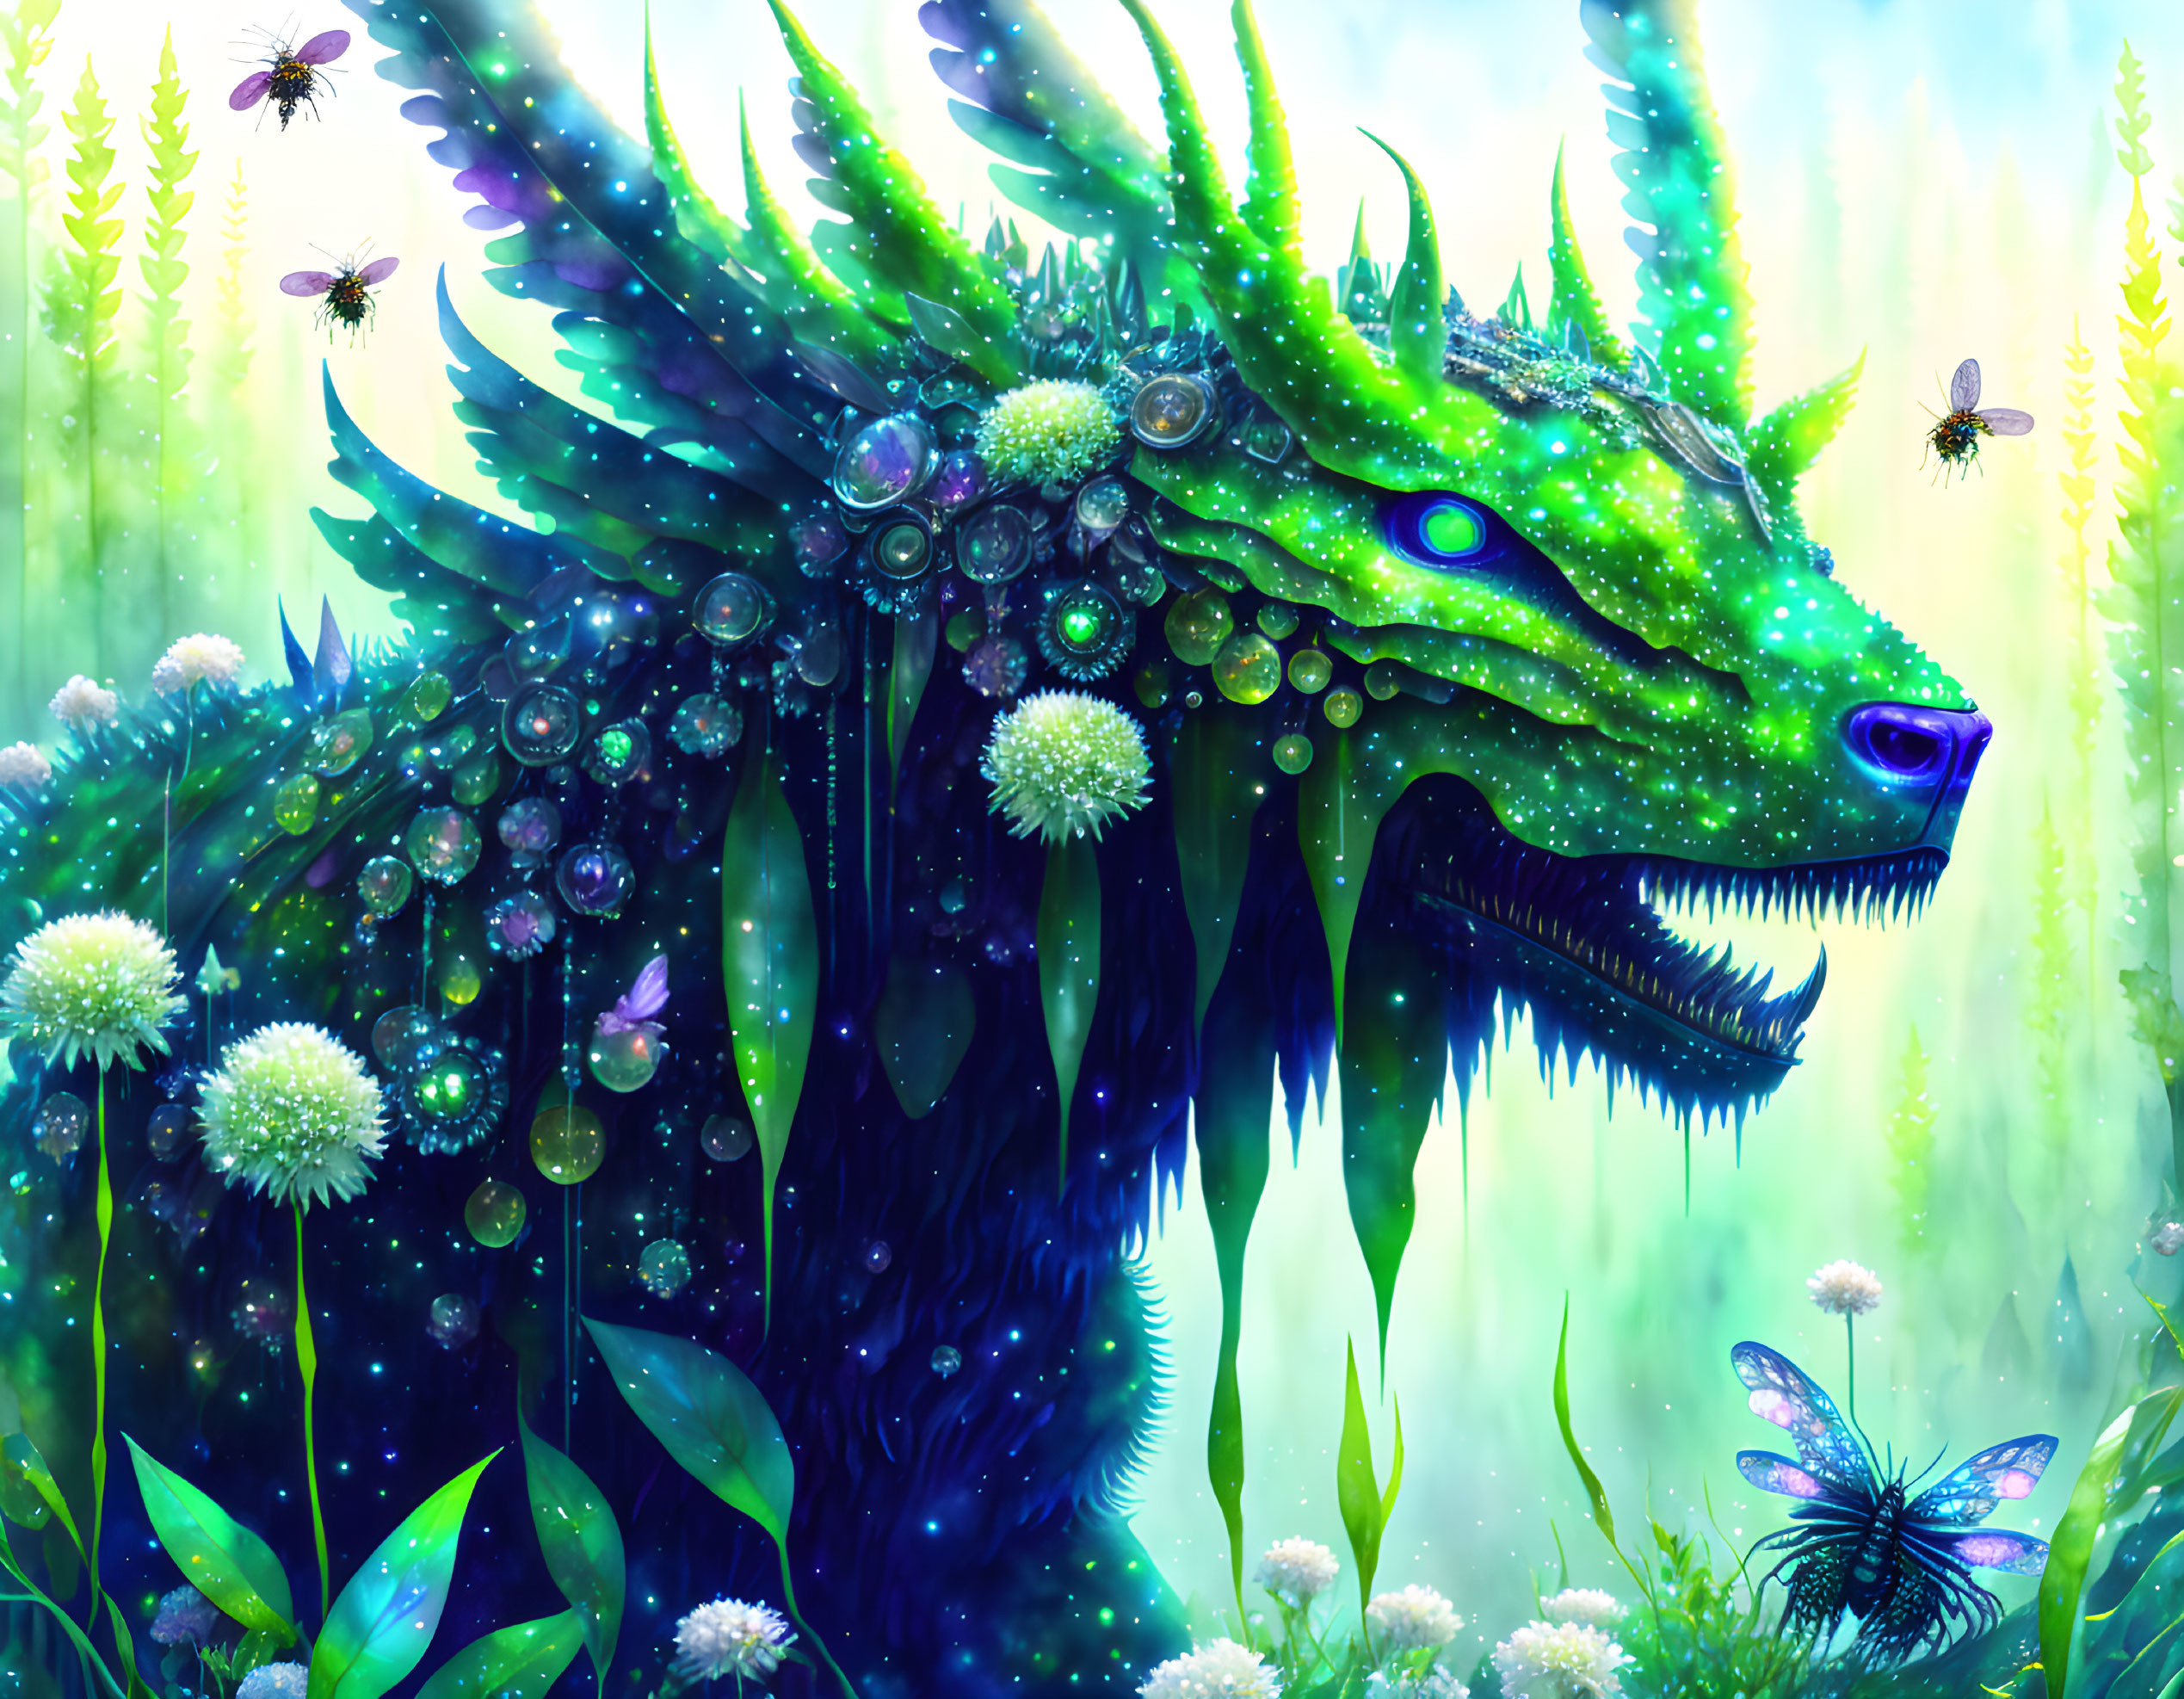 Colorful mythical dragon in lush forest with butterflies and bees